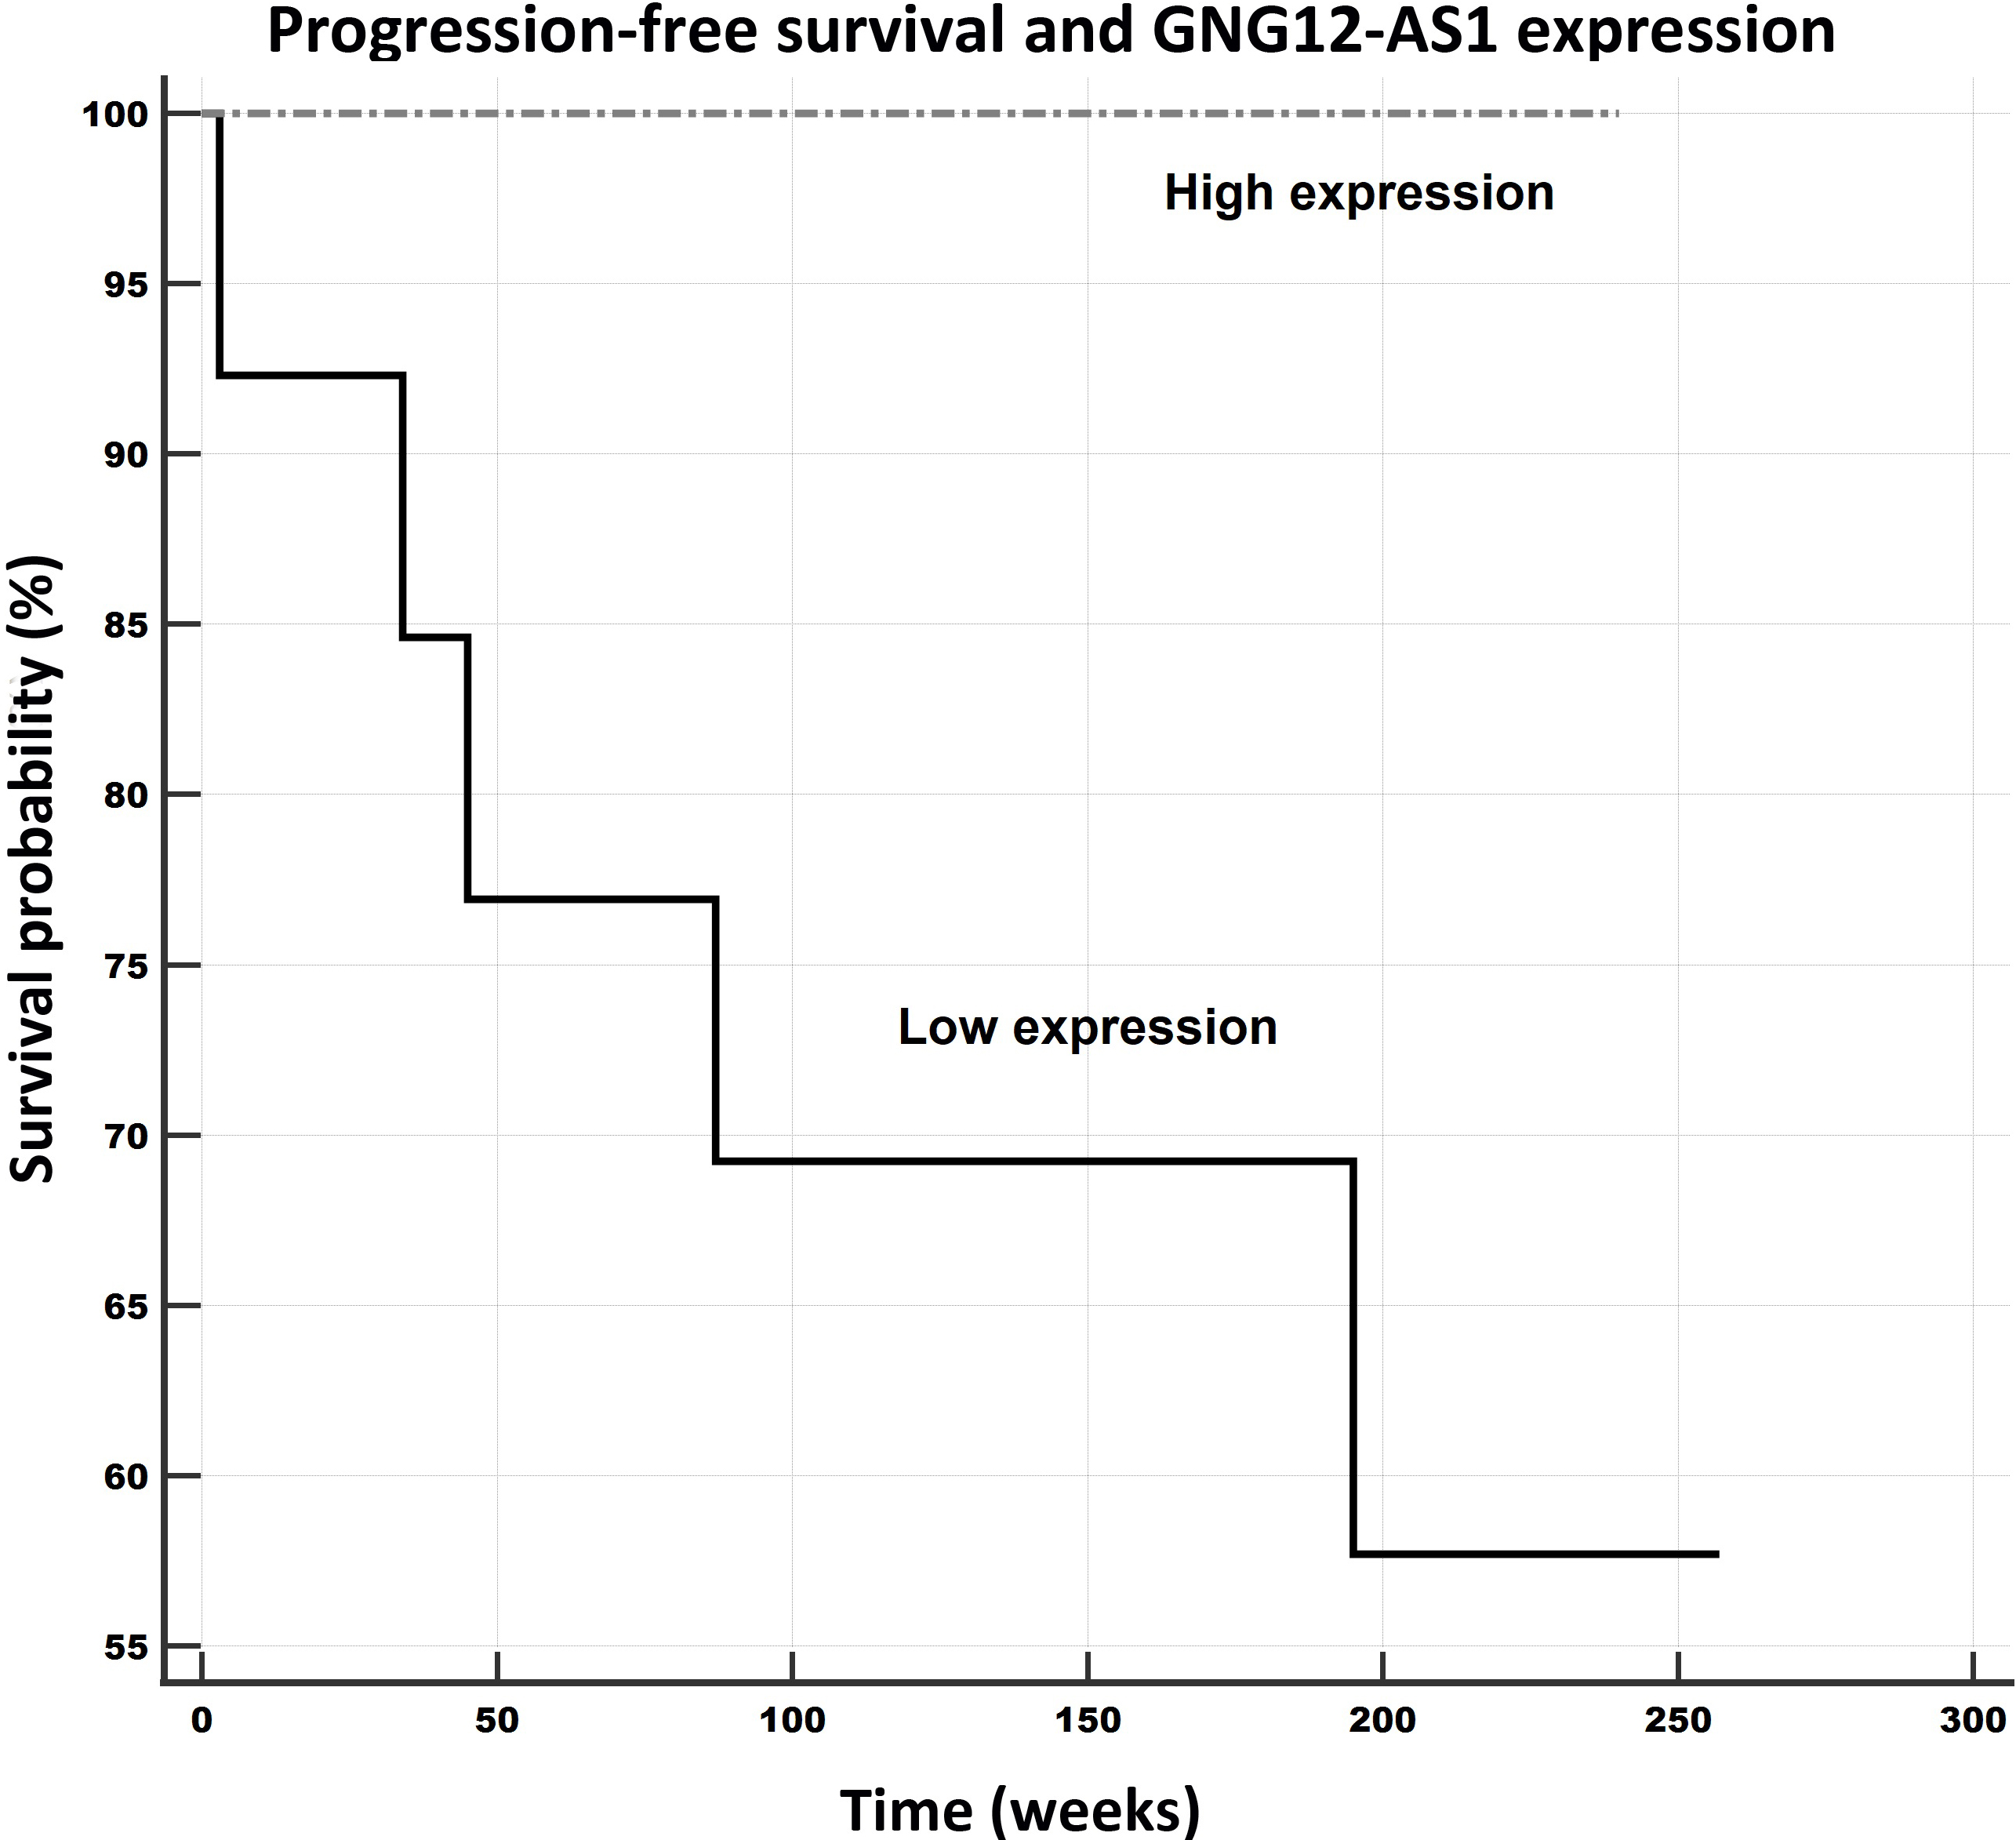 Progression-free survival in relation to GNG12-AS1 expression levels. Notes: Univariate Kaplan-Meier survival curves for progression-free survival (PFS) related to low and high concentrations of GNG12-AS1 in breast cancer tumors. Mean PFS for the low expression subgroup was 3.5 years (183.8 weeks), and for the high expression subgroup it was 4.6 years (240 weeks).